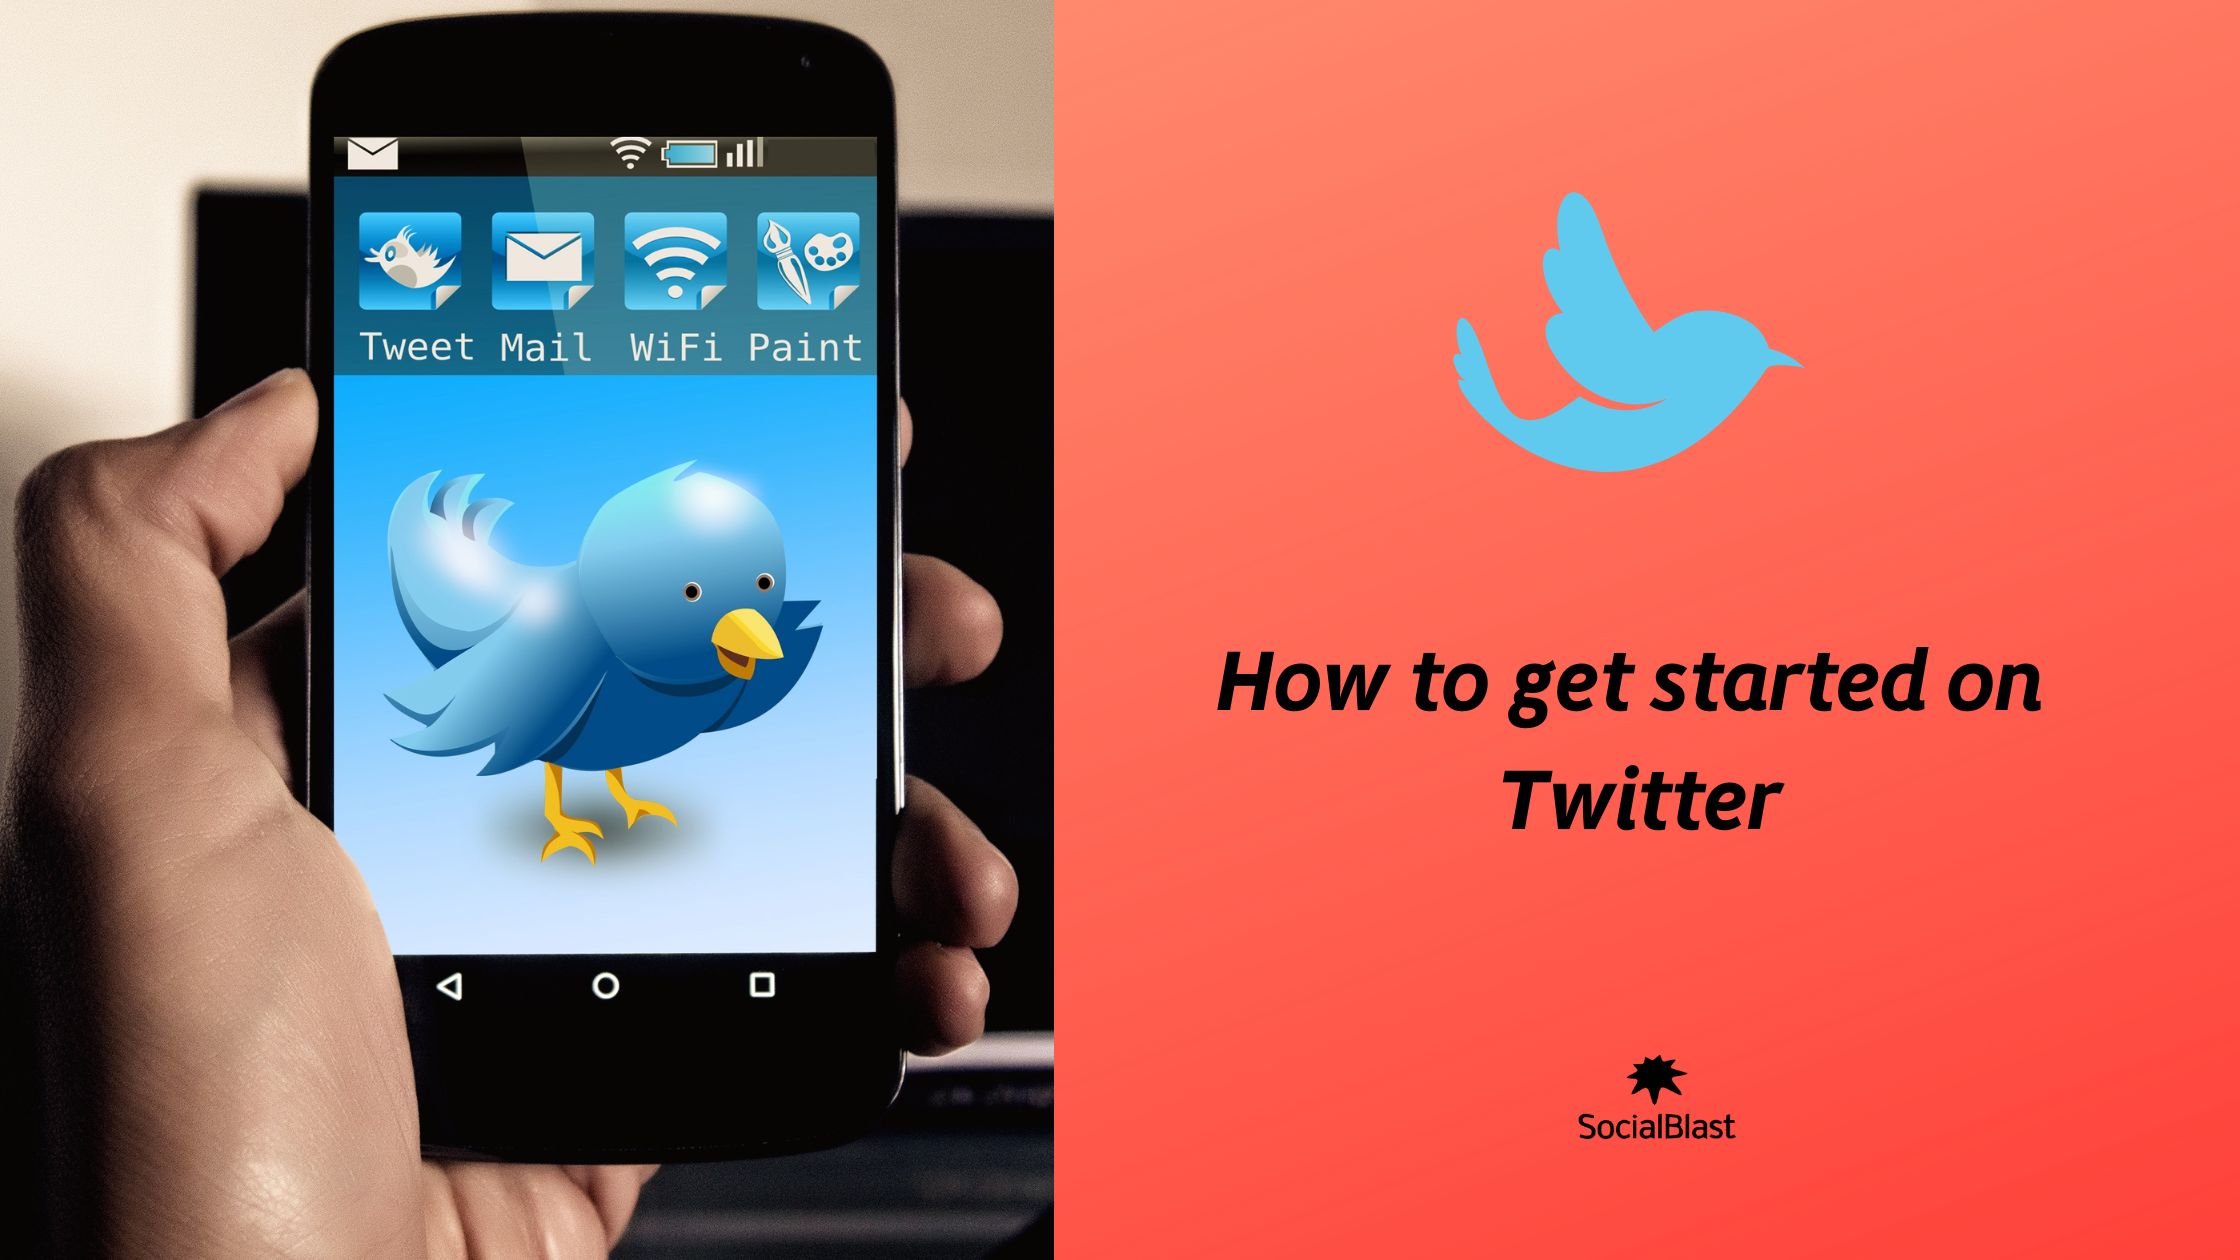 How to get started on Twitter